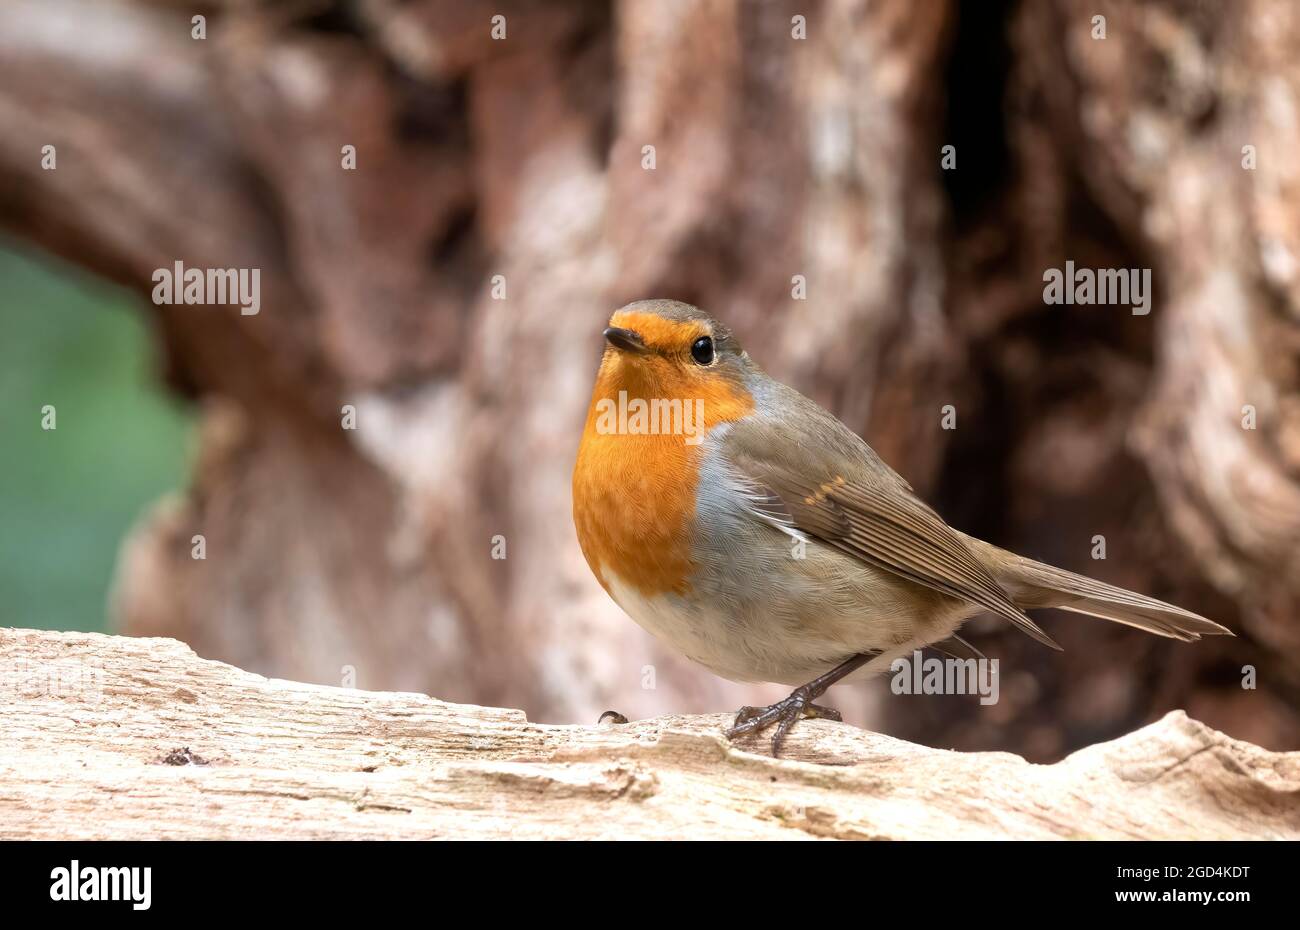 European Robin (Erithacus rubecula), seen from the front, adult perched on the floor Stock Photo